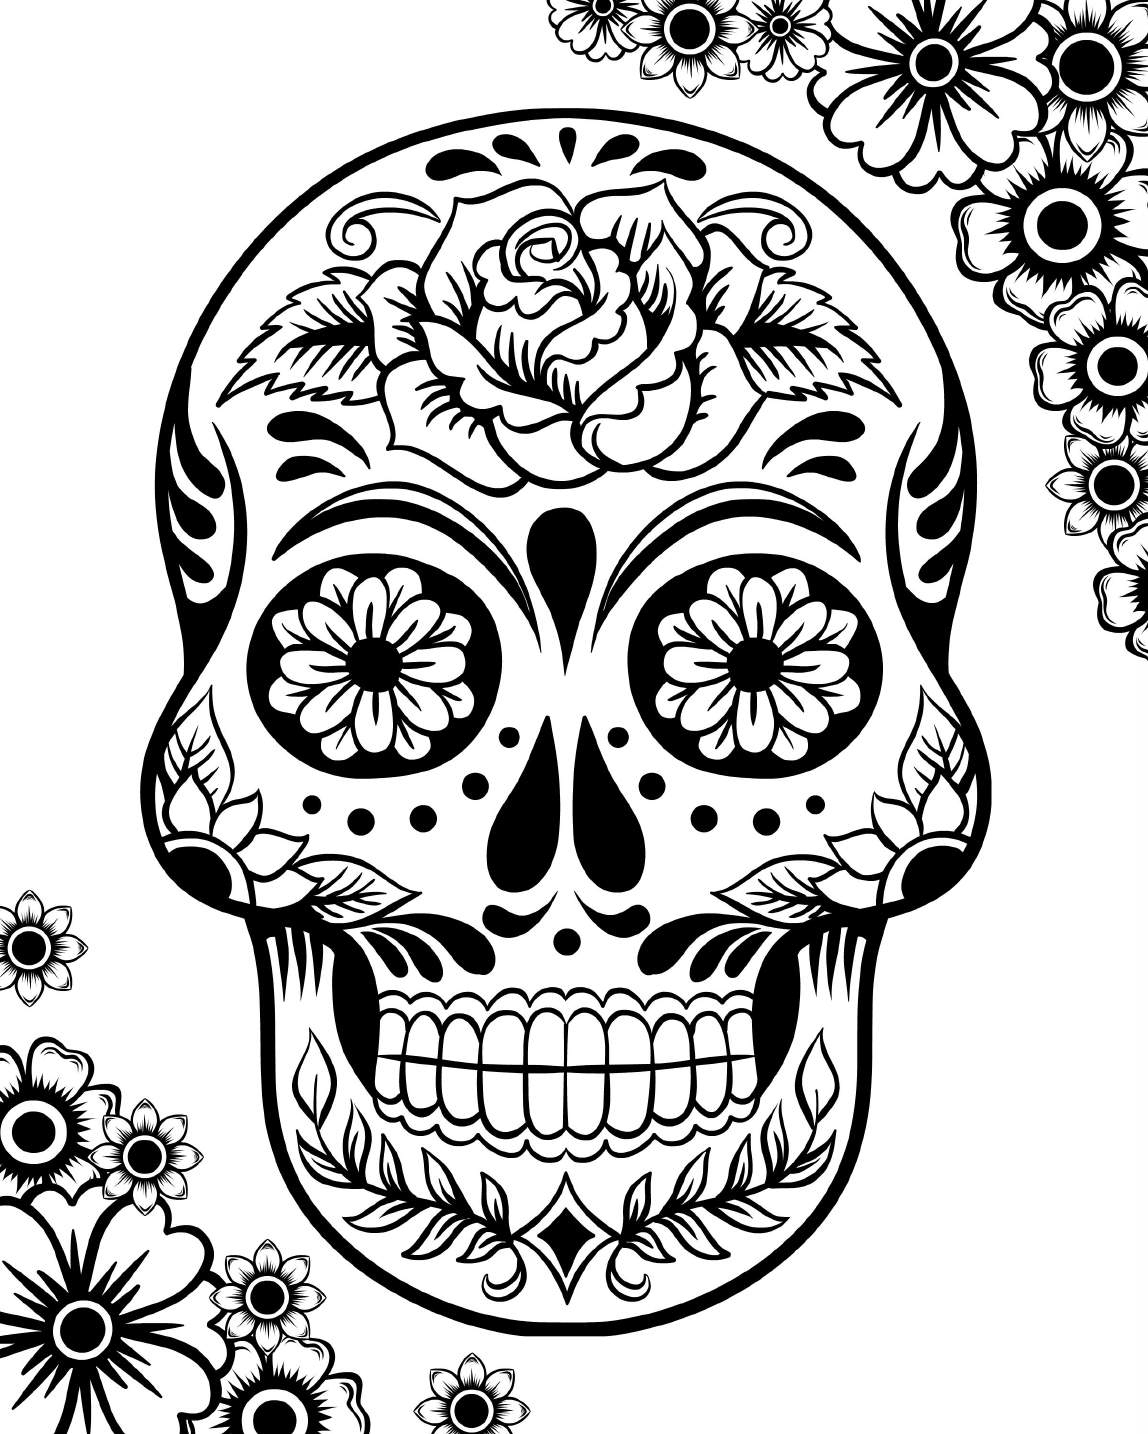 Free Printable Day Of The Dead Coloring Pages - Best Coloring Pages | Free Printable Day Of The Dead Worksheets